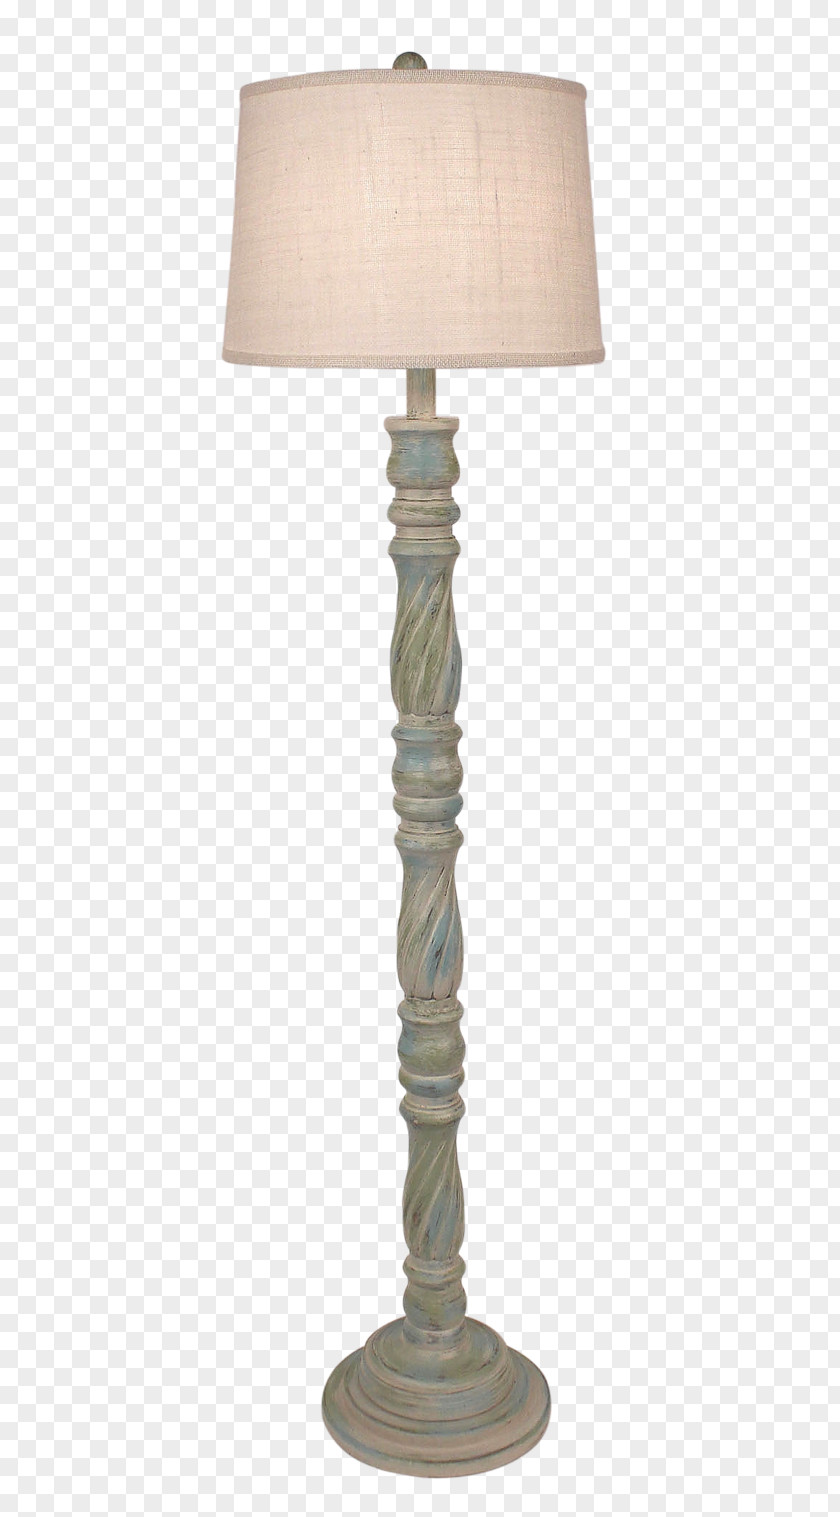 Rustic Cottage Bathroom Electric Light Lamp Table Lighting PNG